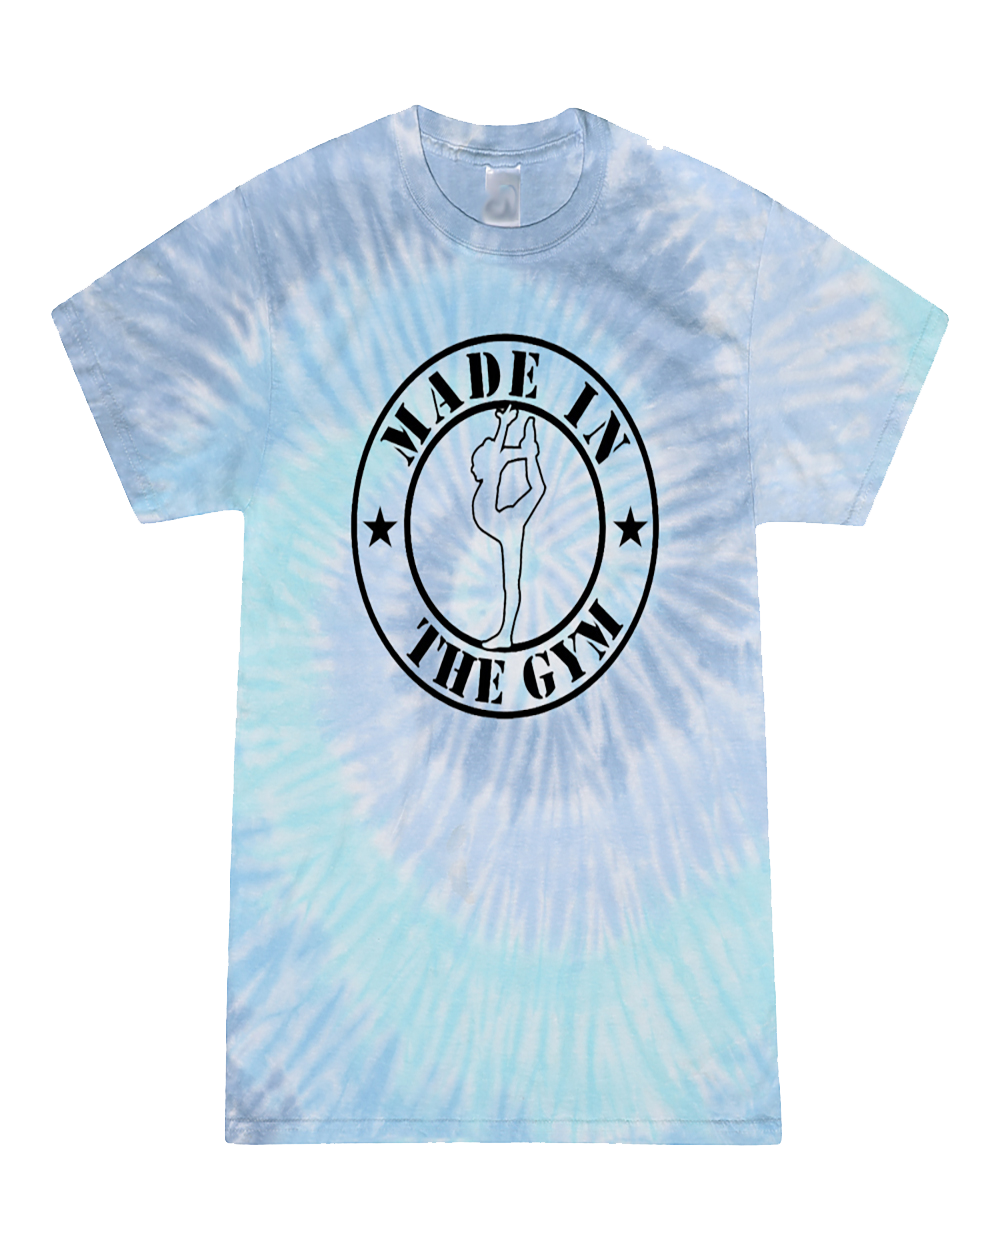 Made In The Gym Youth Tie Dye T-Shirt